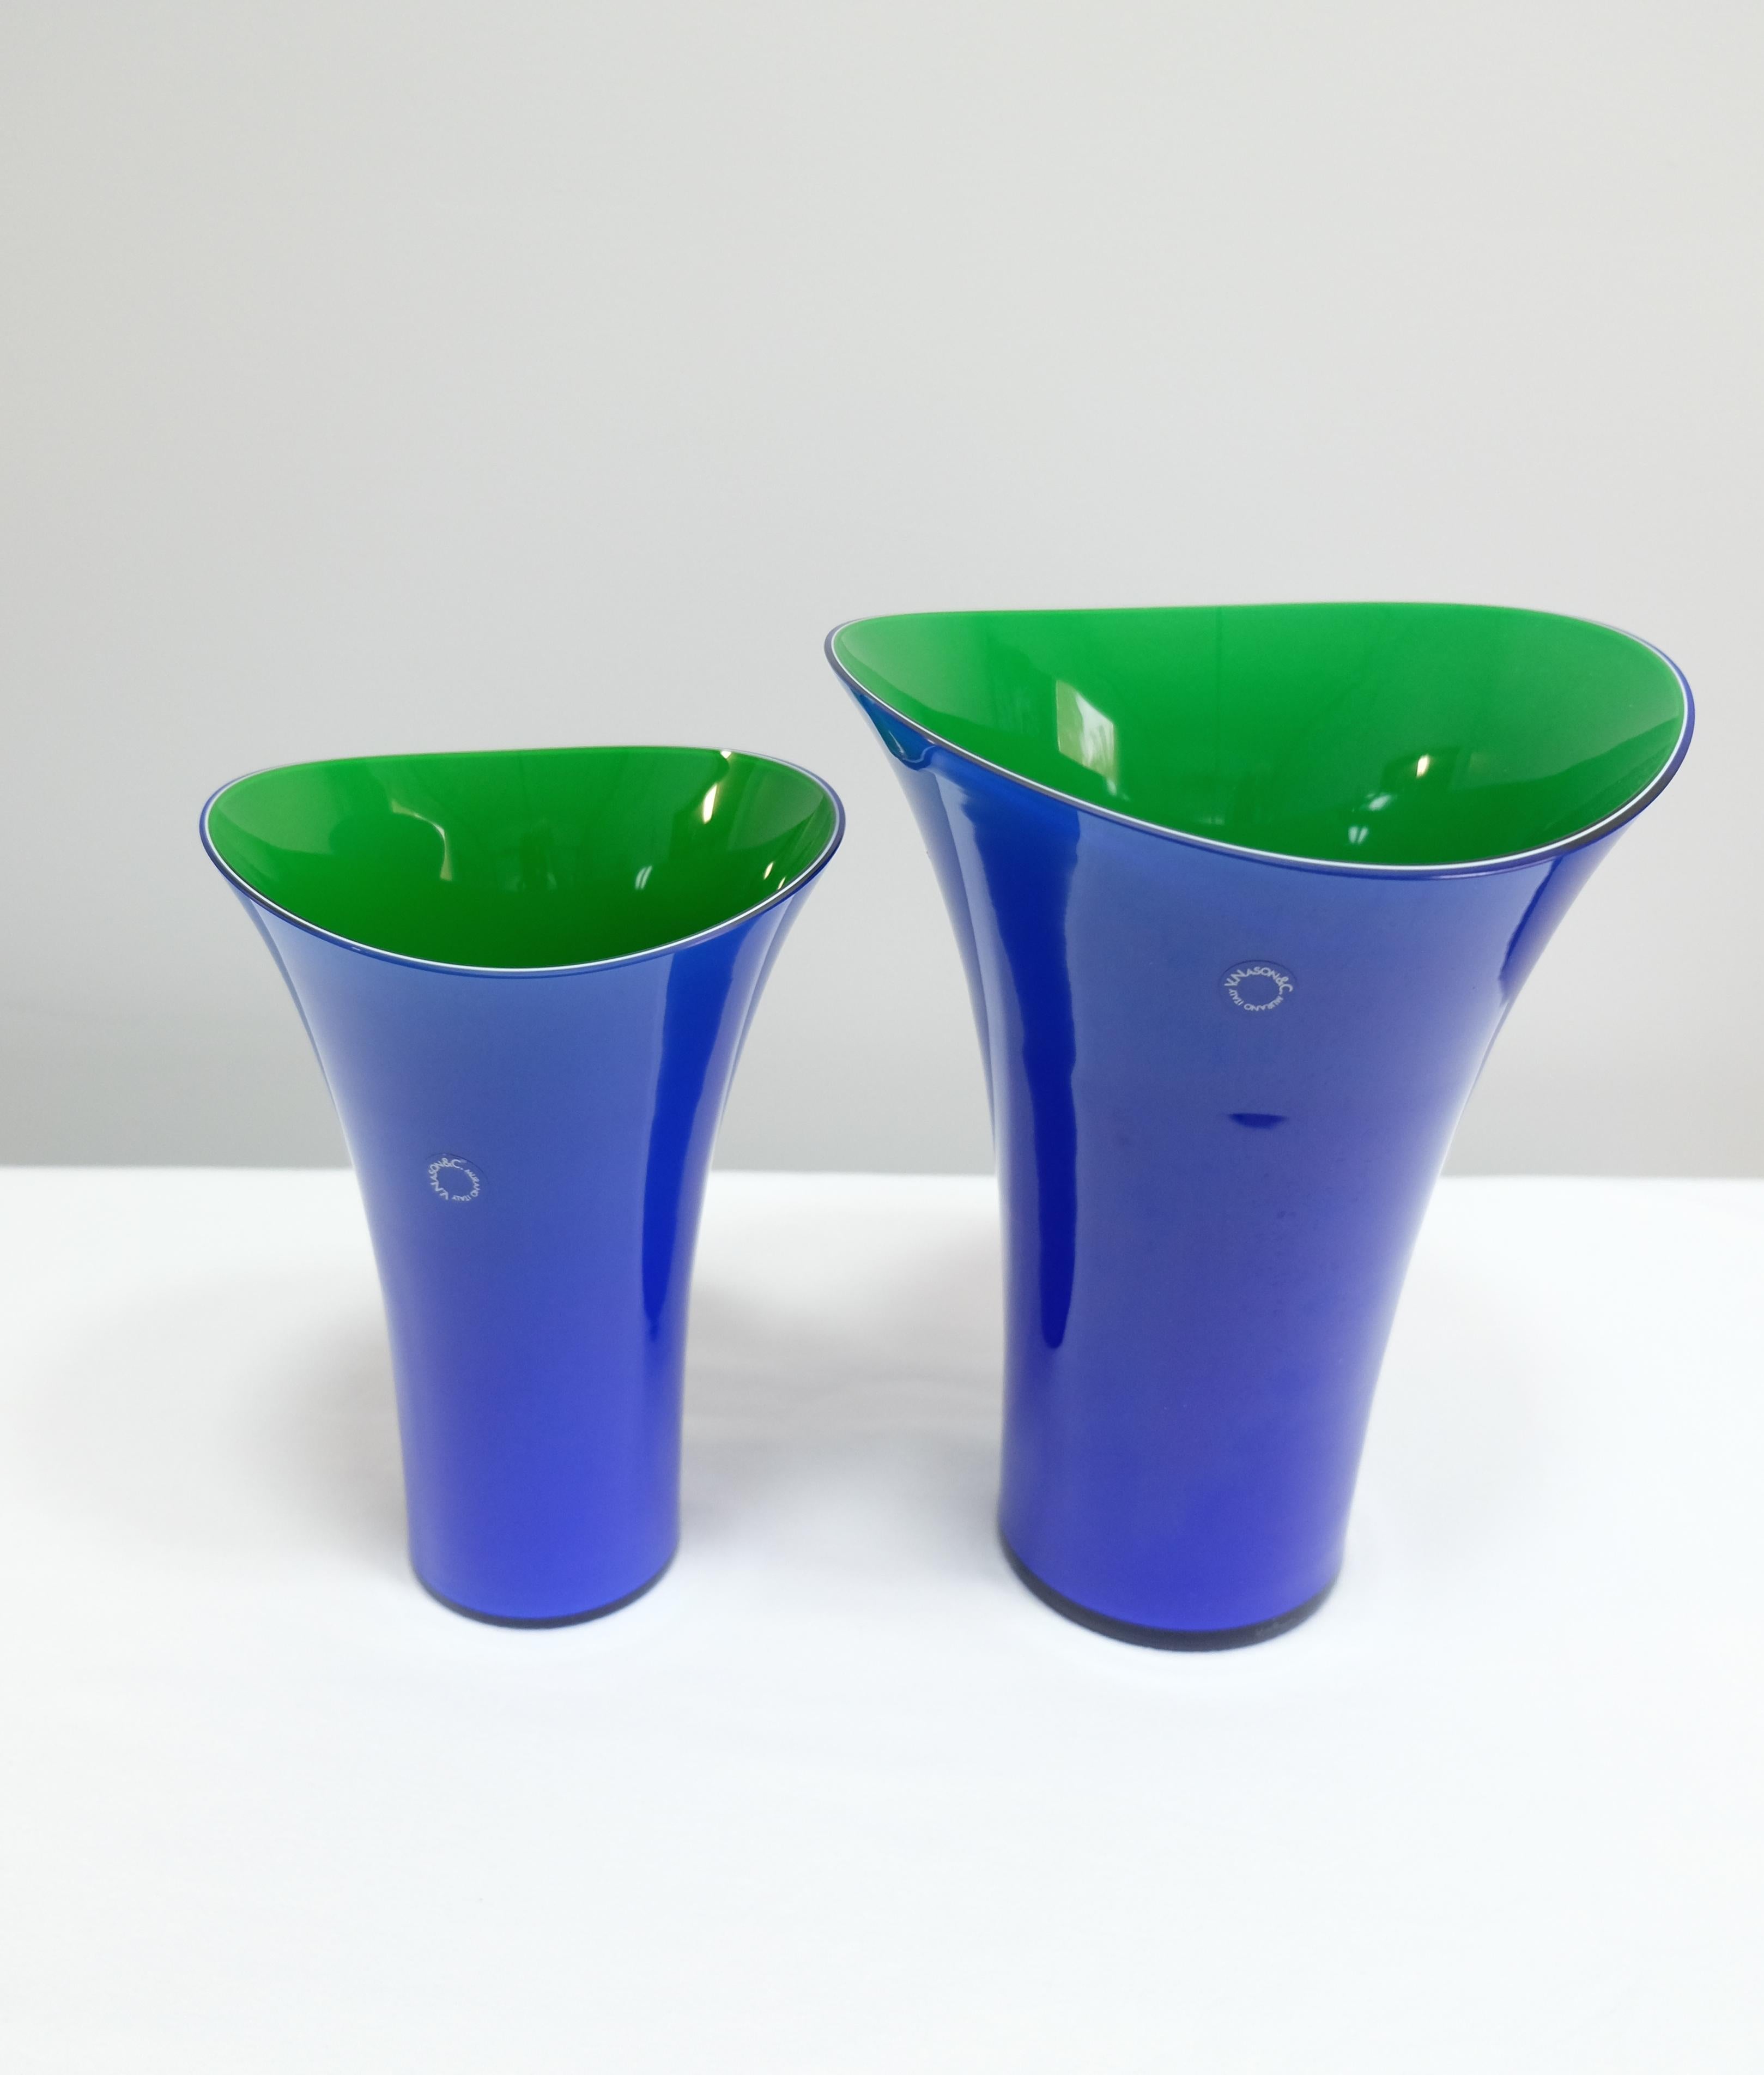 Offered for sale is a striking pair of hand blown asymmetrical vases in blue and green by V. Nason & C. The vases retain the original maker's label. Vincenzo Nason established his glassworks, Vincenzo Nason & Cie (VNC) on the island of Murano,